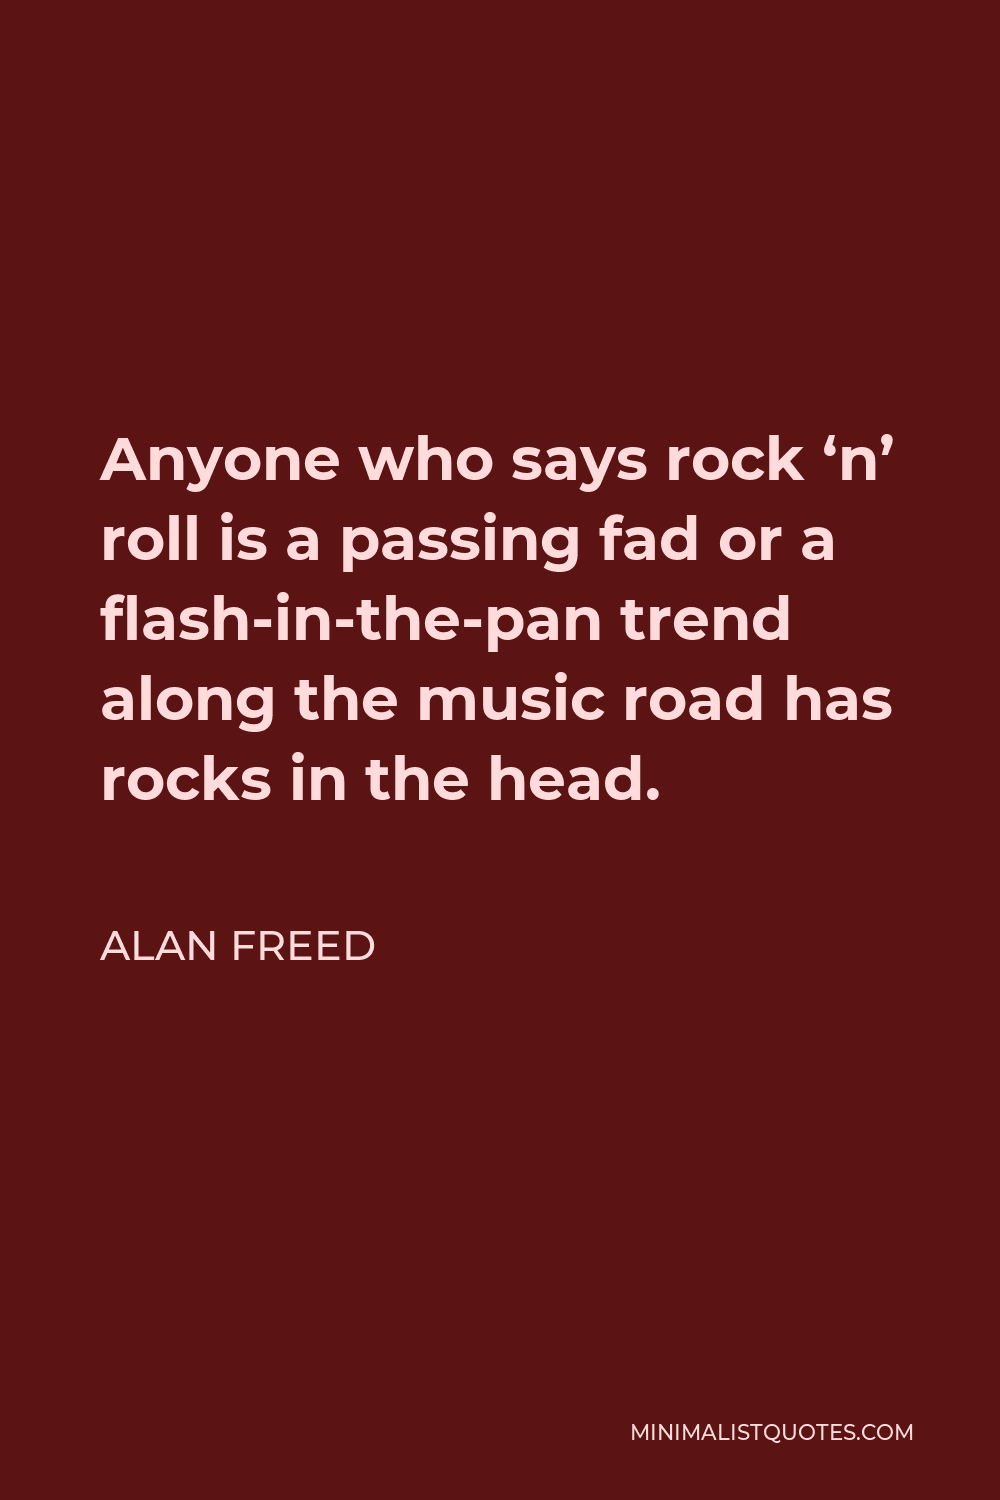 Alan Freed Quote - Anyone who says rock ‘n’ roll is a passing fad or a flash-in-the-pan trend along the music road has rocks in the head.